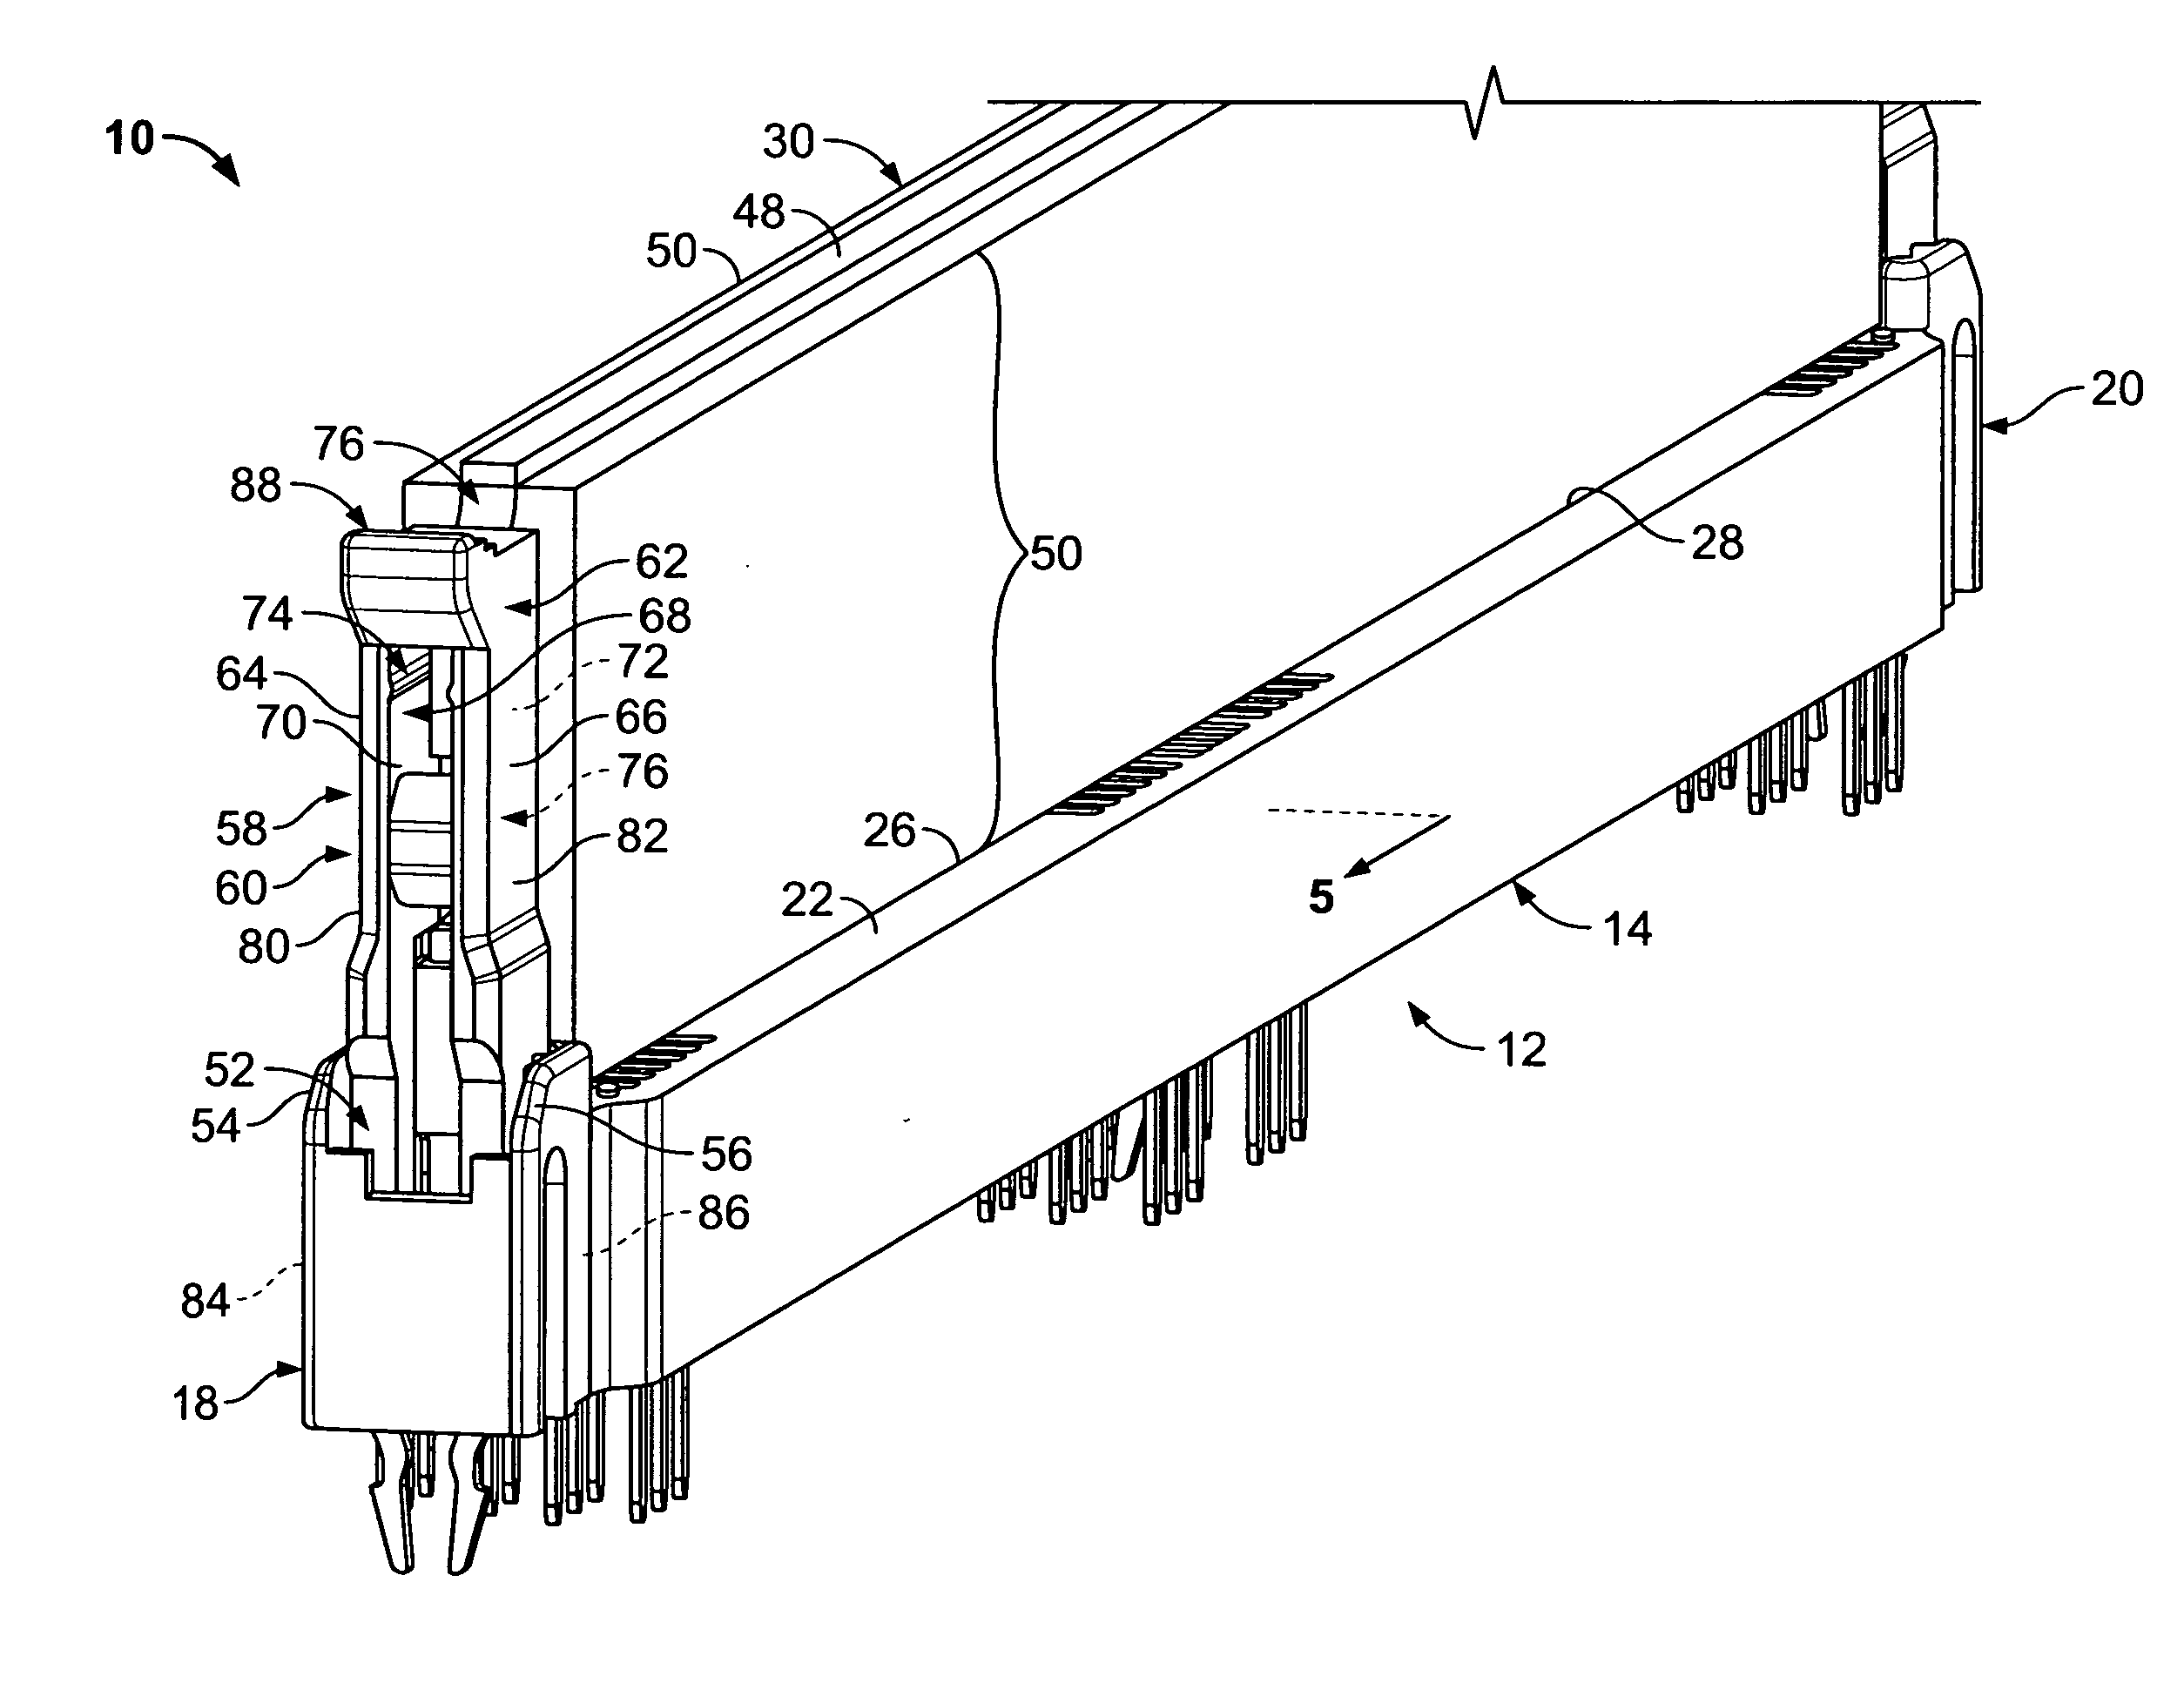 Electrical connector assembly with shorting contacts